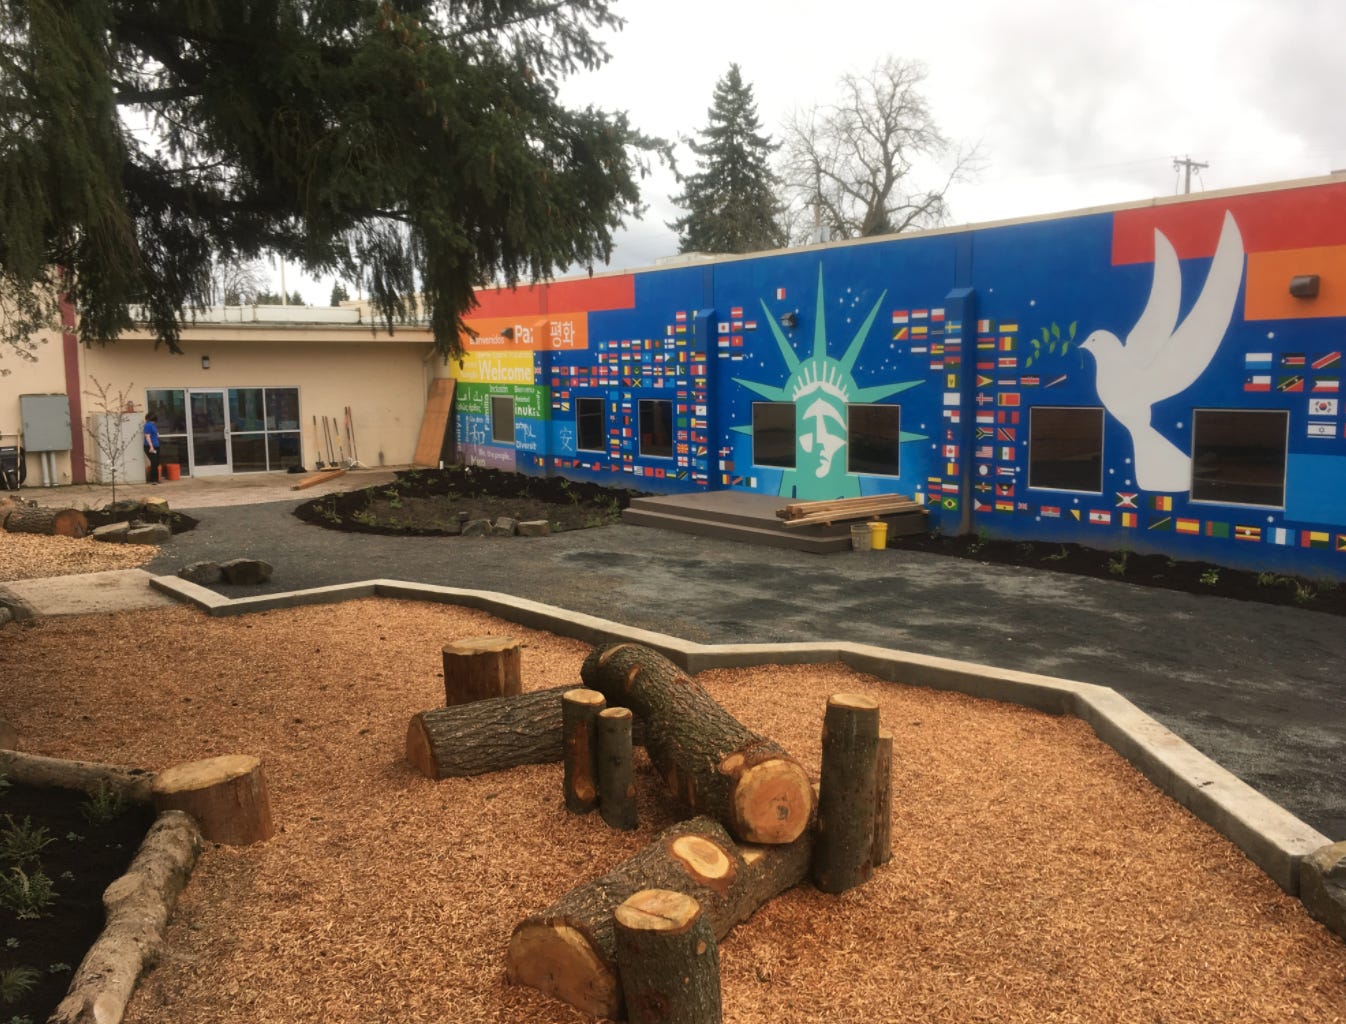 The same parking lot as above is pictured, but most of the pavement has been replaced by wood mulch, decorative tree stumps, and a colorful painting on the side of the building, featuring (from left to right) the colors of the rainbow flag, the word "peace" in many languages, flags of the world, a stylized illustration of the Statue of Liberty, and a white dove carrying an olive branch. There is fresh soil and small plants growing along the edge of the building. 